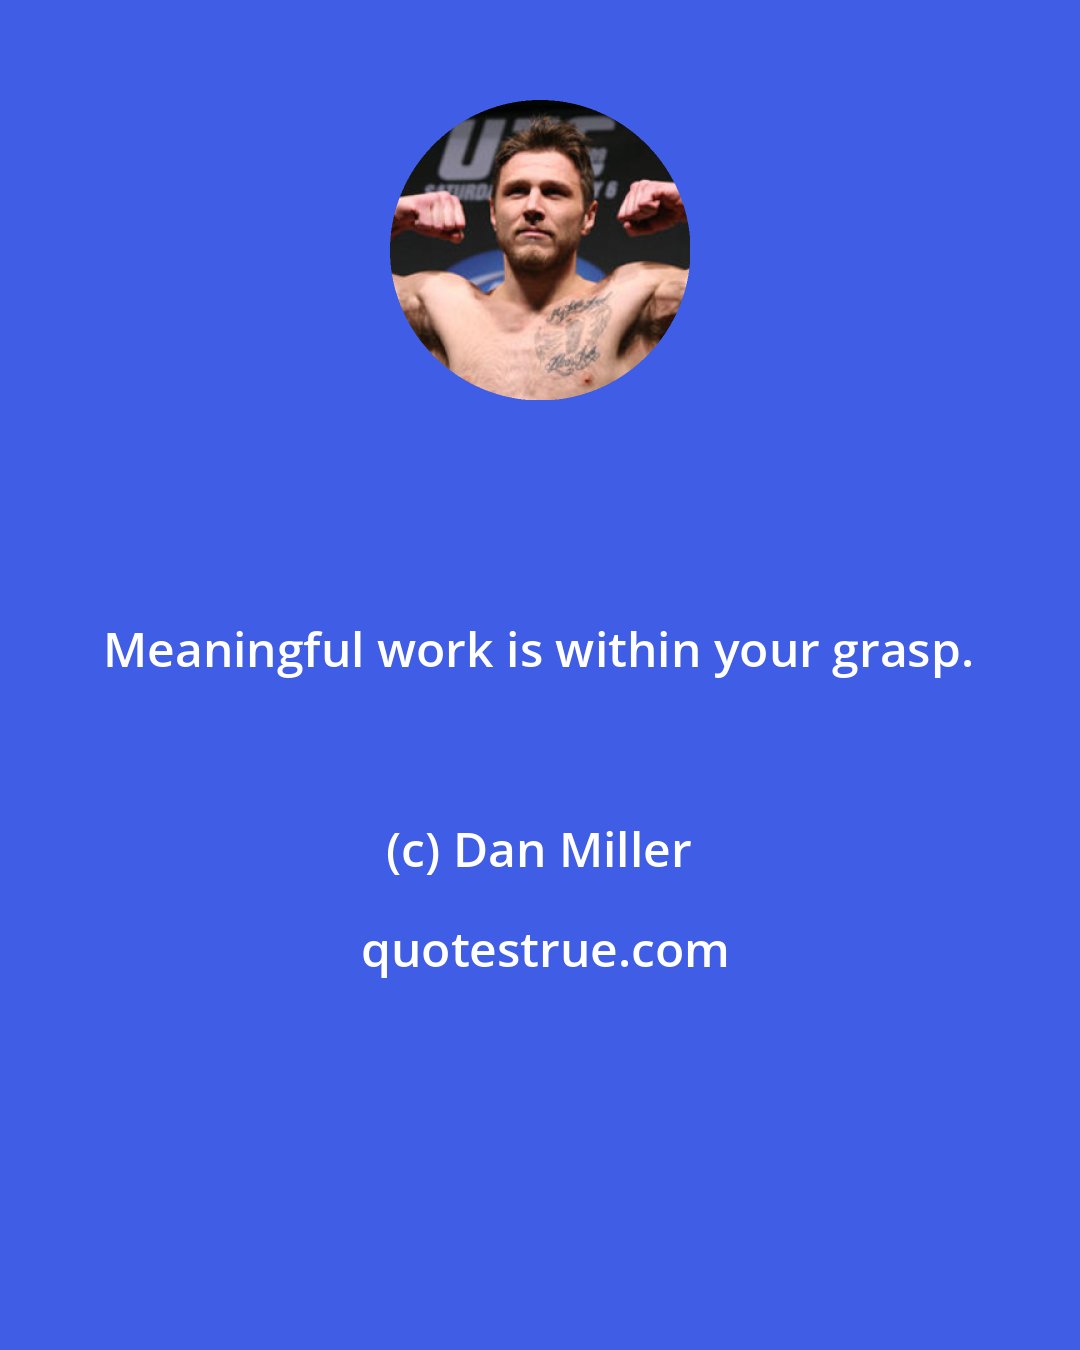 Dan Miller: Meaningful work is within your grasp.